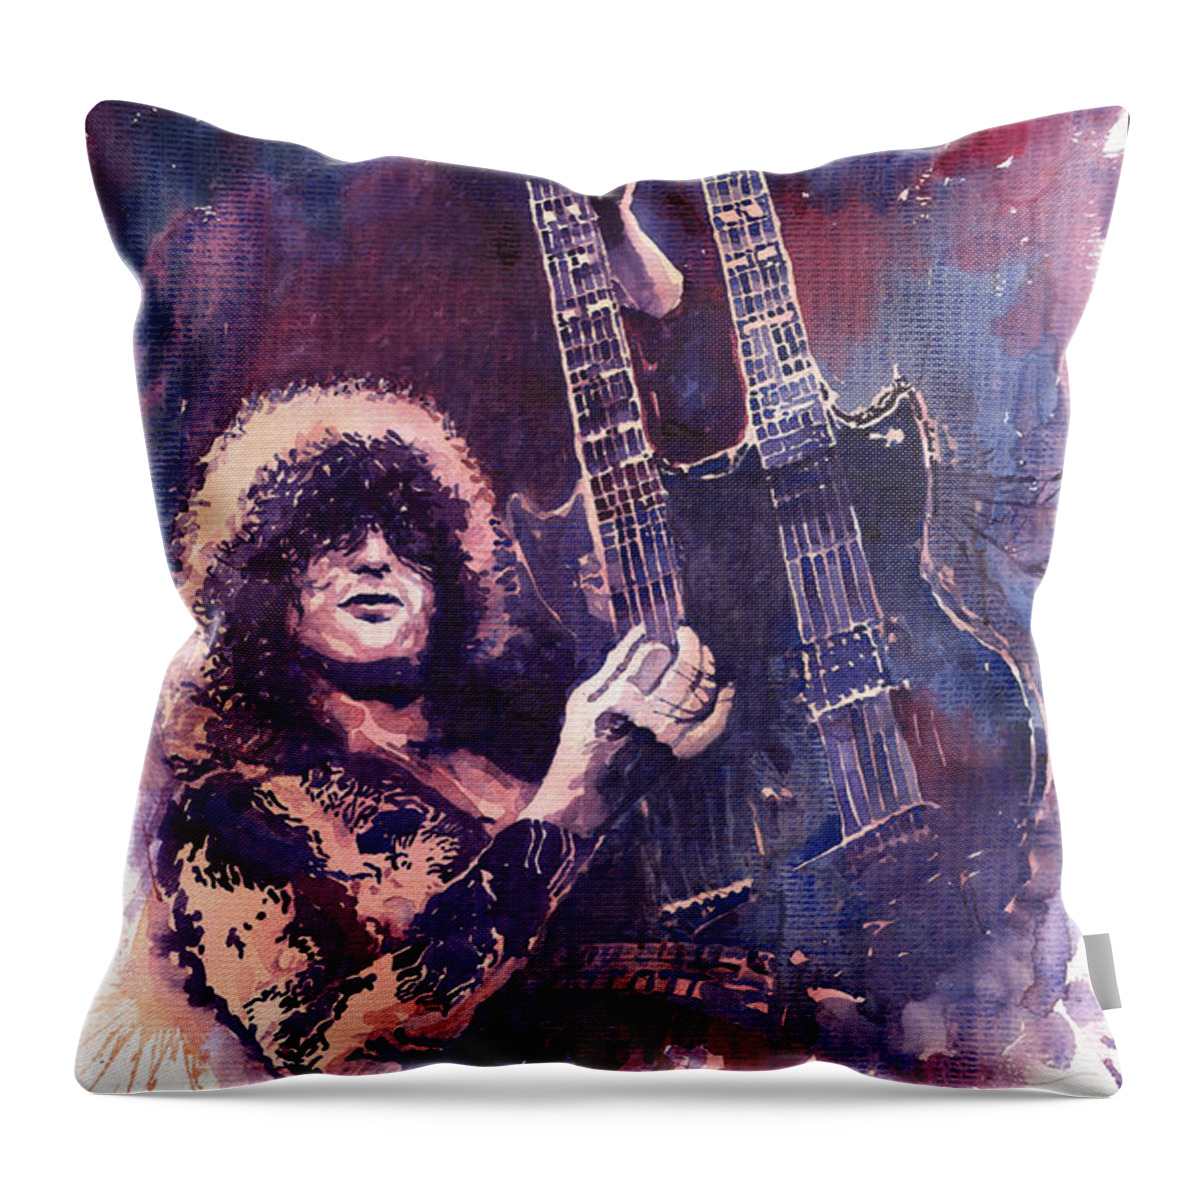 Watercolour Throw Pillow featuring the painting Jimmy Page by Yuriy Shevchuk